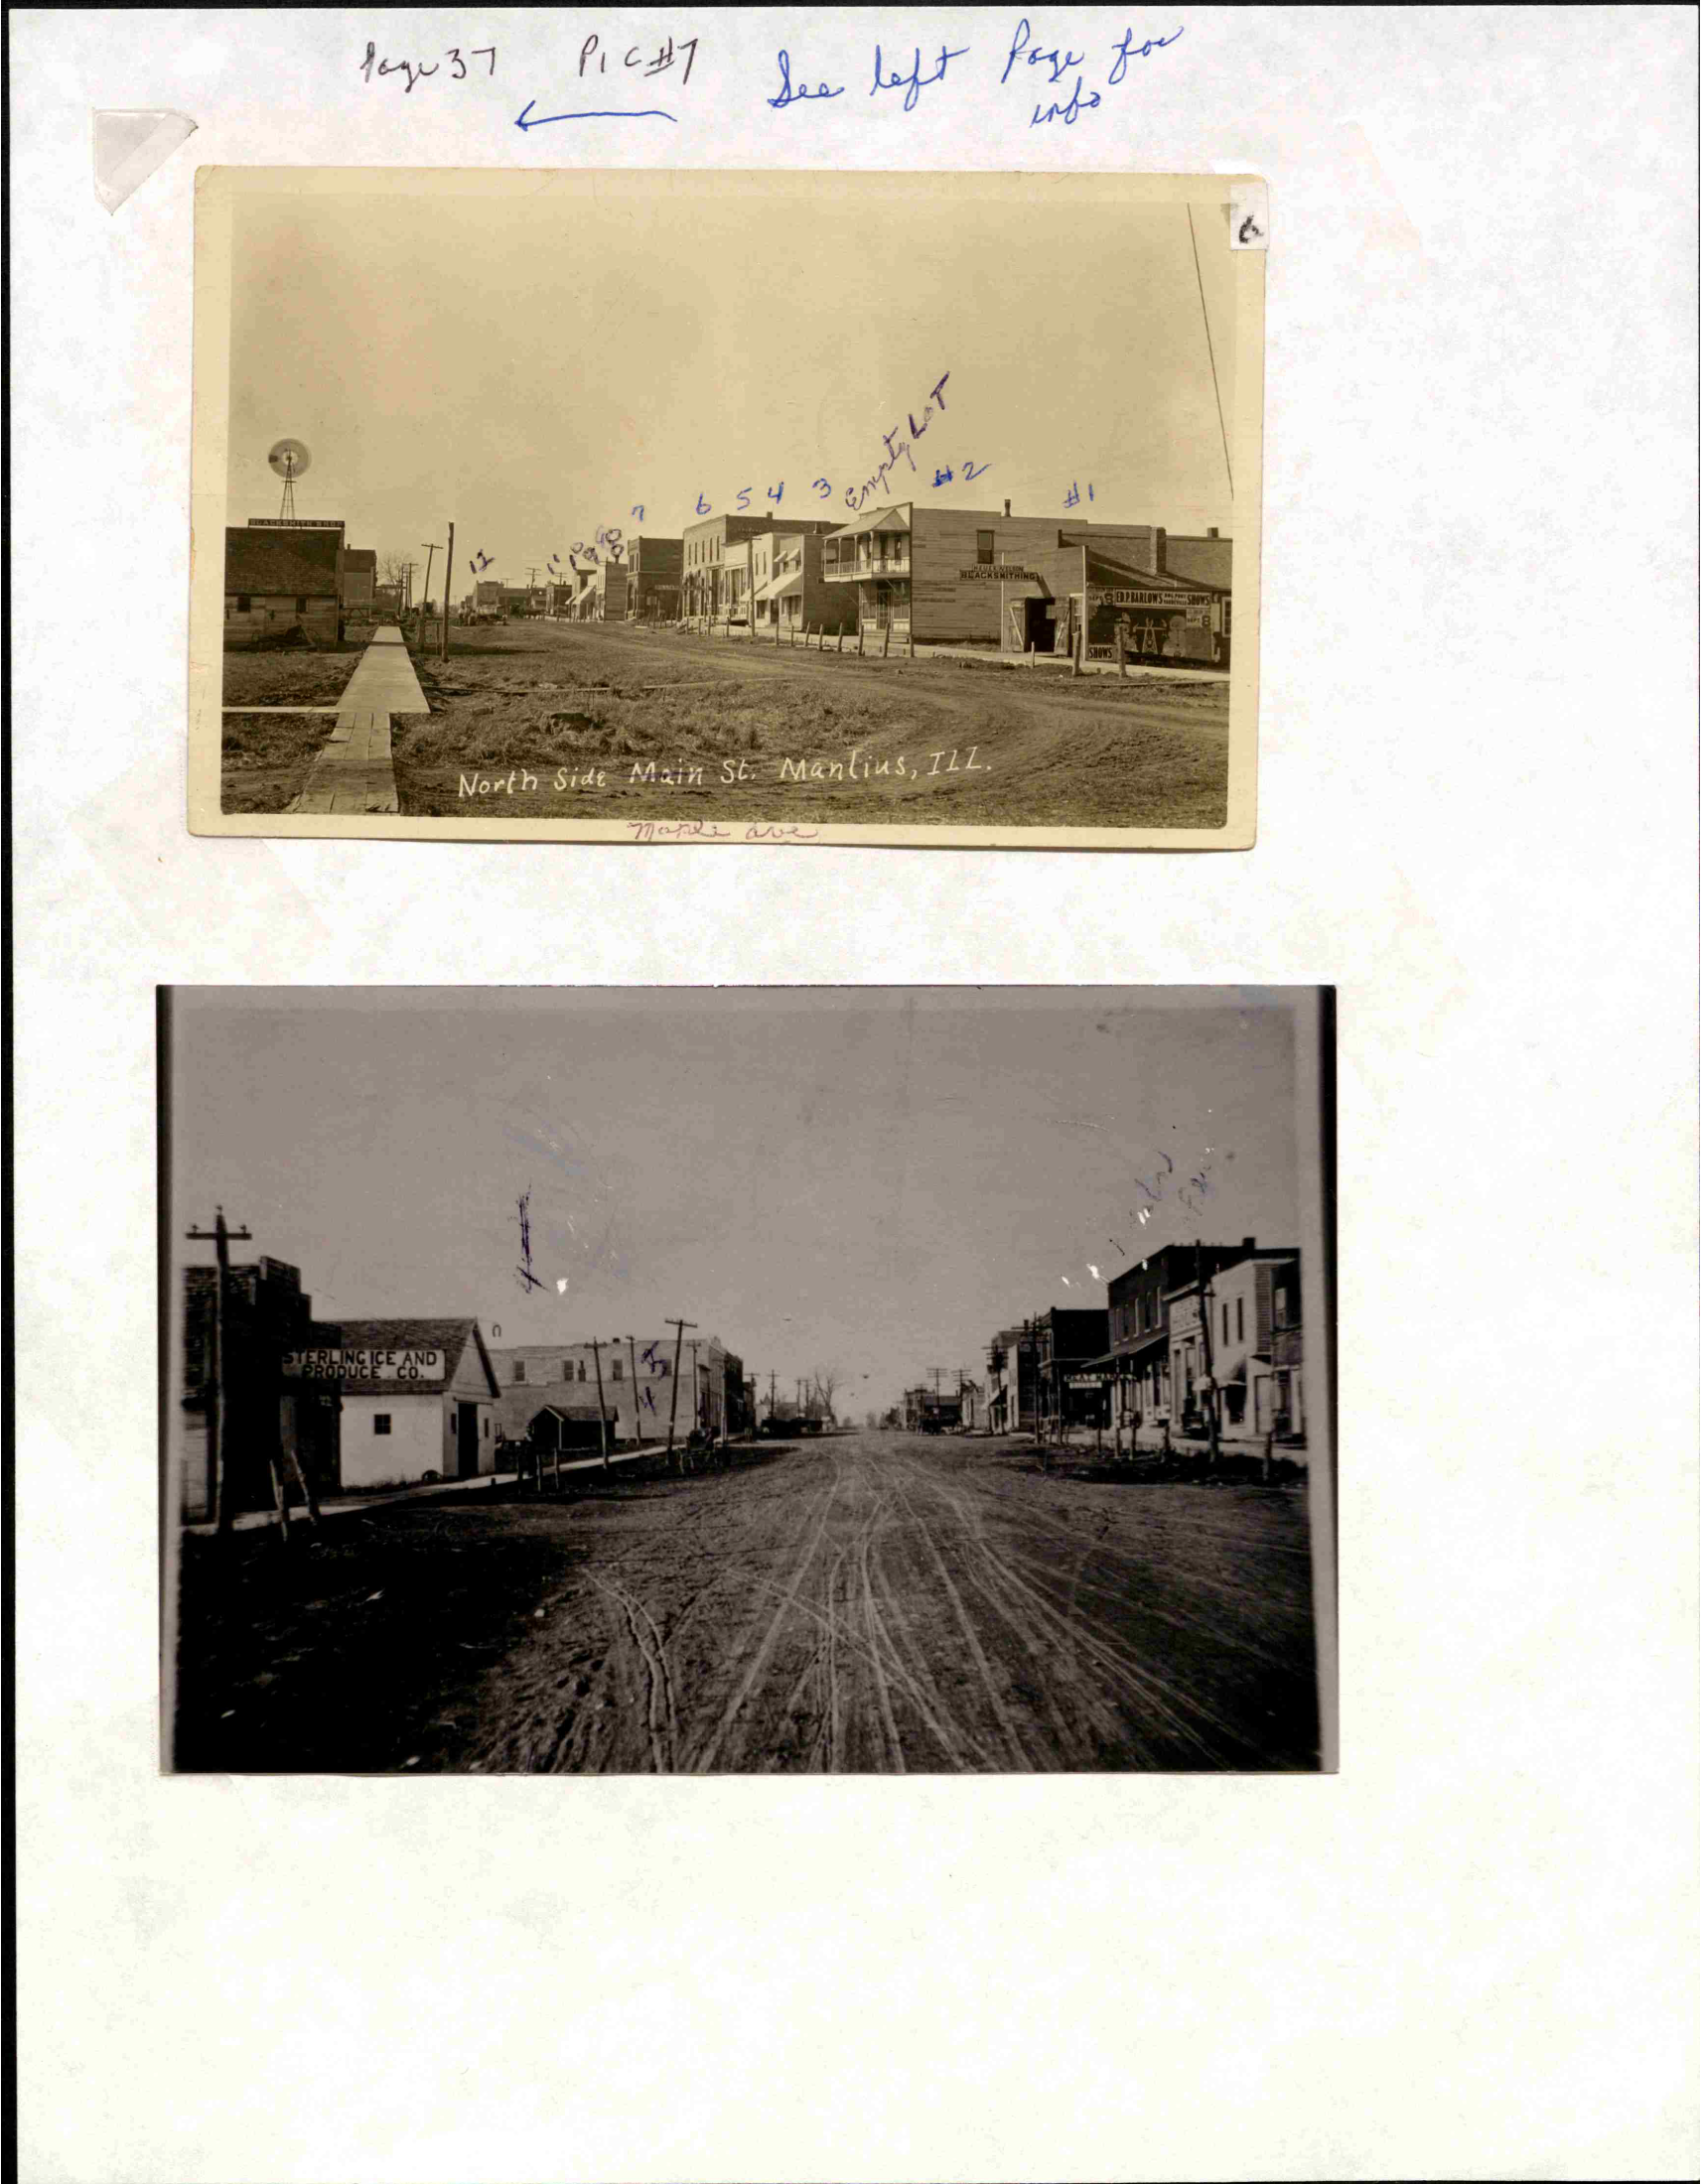 Album 1B MANLIUS NORTH SIDE, NELSON AND MAIN STREET Page 121